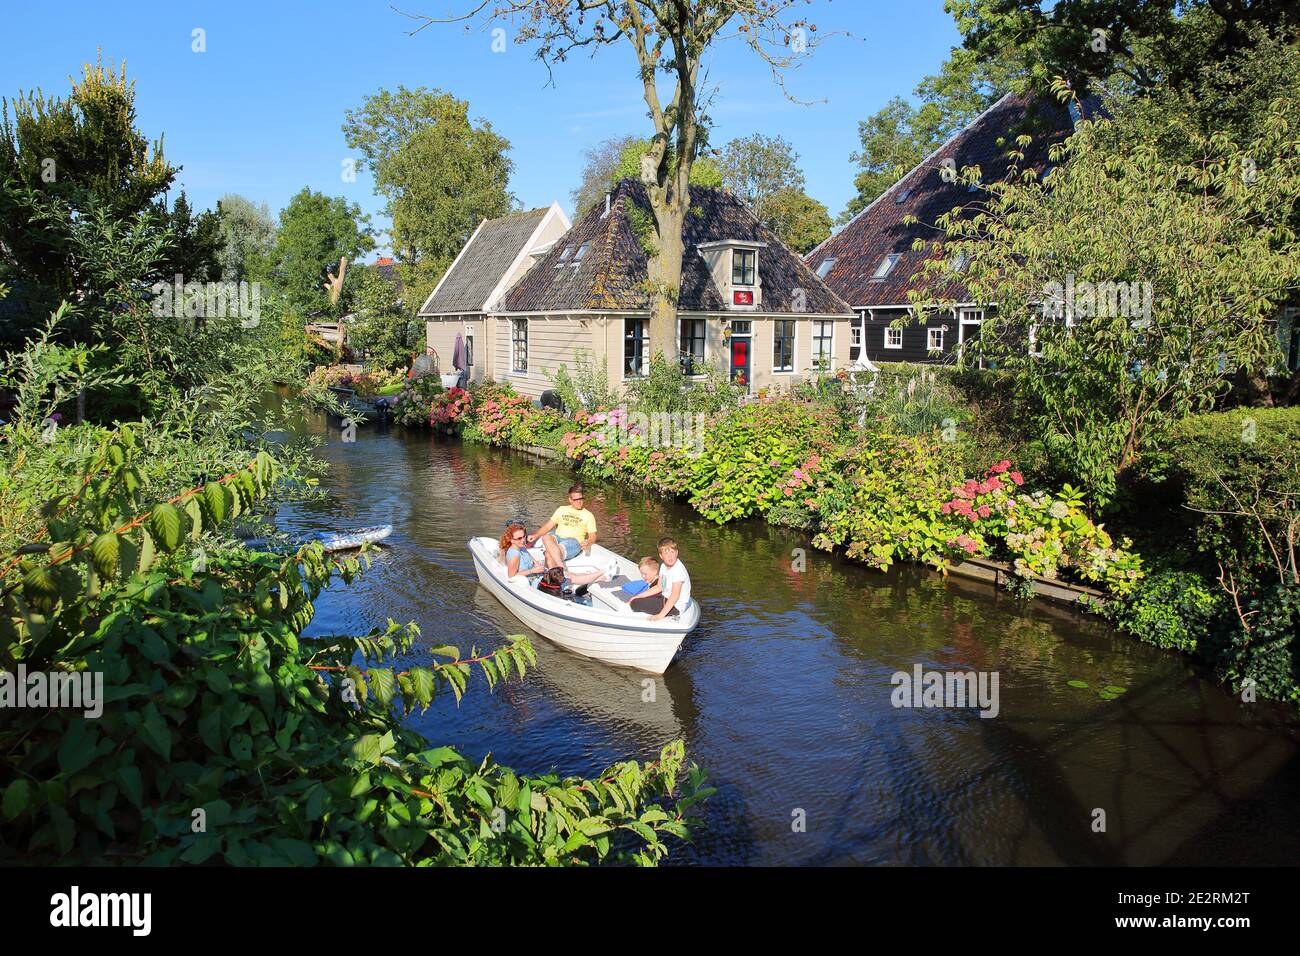 BROEK IN WATERLAND, NETHERLANDS - SEPTEMBER 13, 2020: A small town with traditional old wooden houses, with a Dutch family enjoying the canal by boat Stock Photo